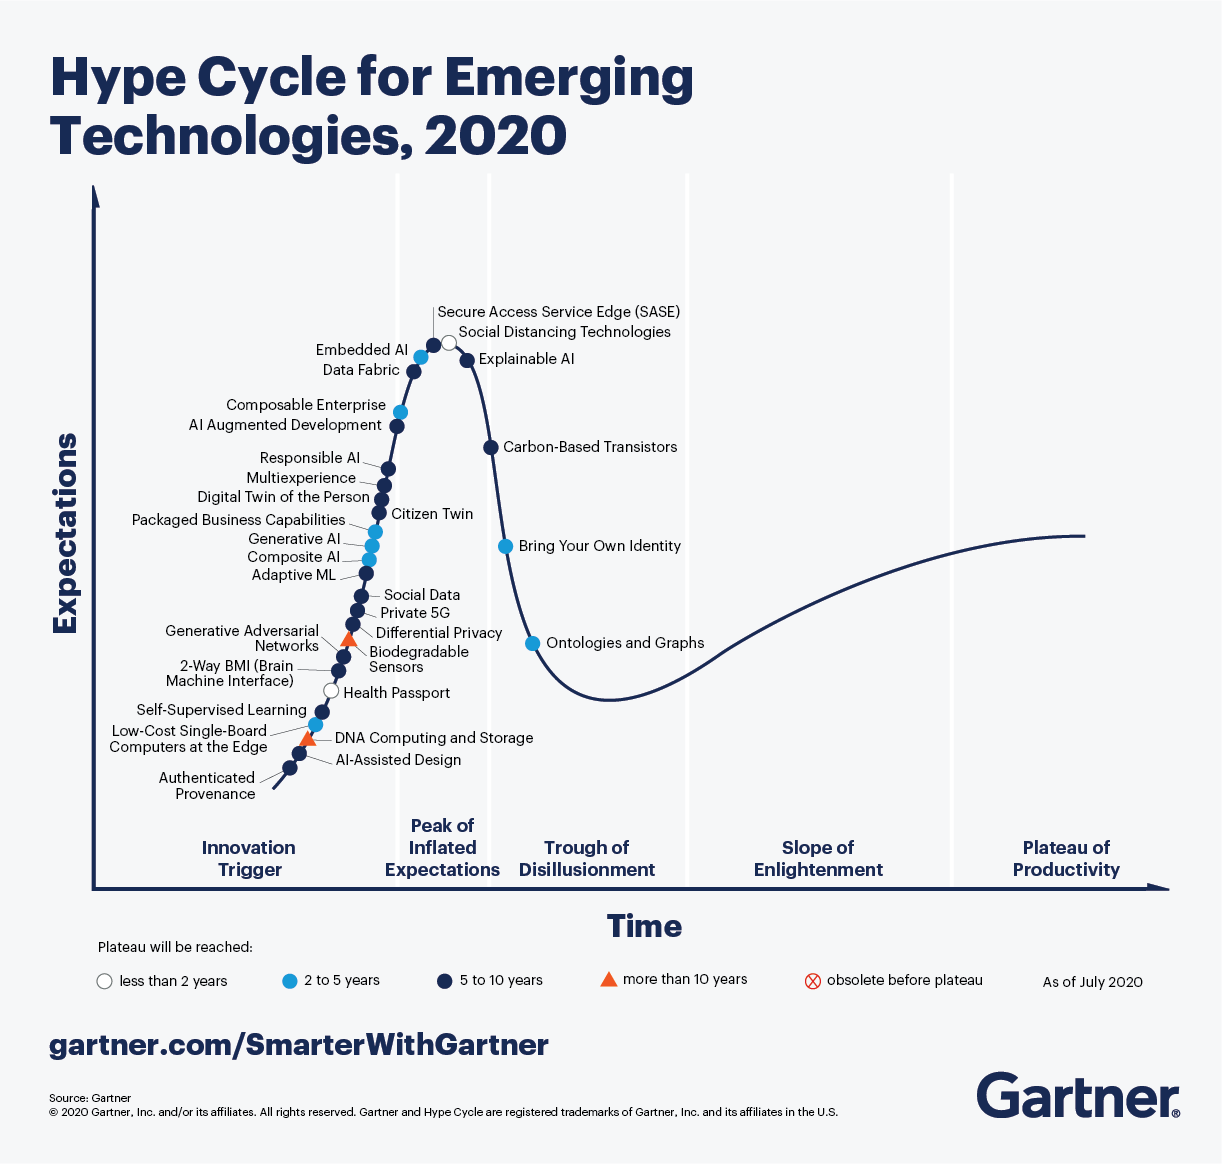 The Gartner Hype Cycle for Emerging Technologies, 2020 features five trends and 30 technologies that will drive significant change over the next five to ten years. 